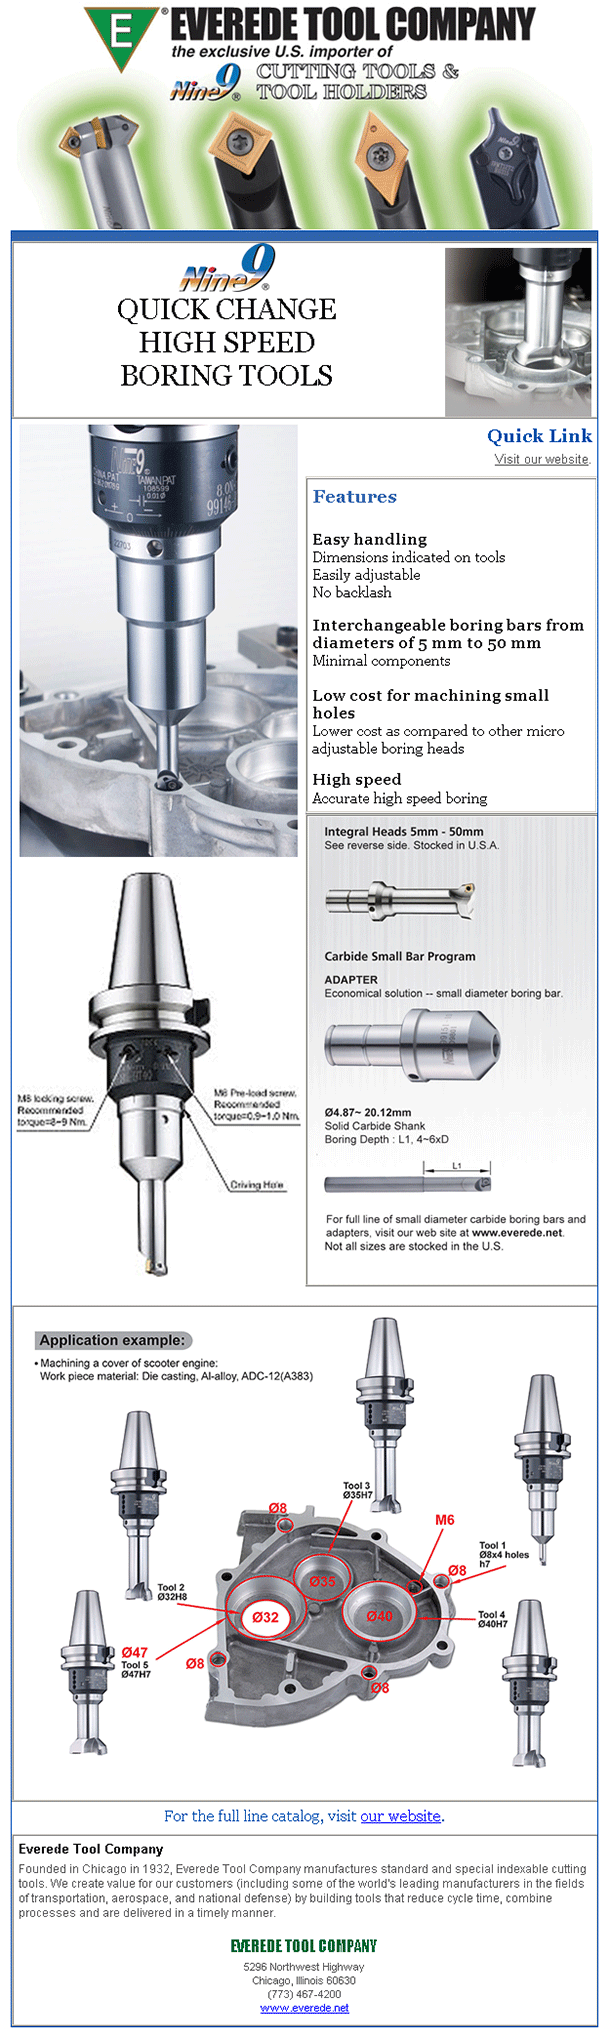 eNews Quick Change High Speed Boring Tools Email Promo